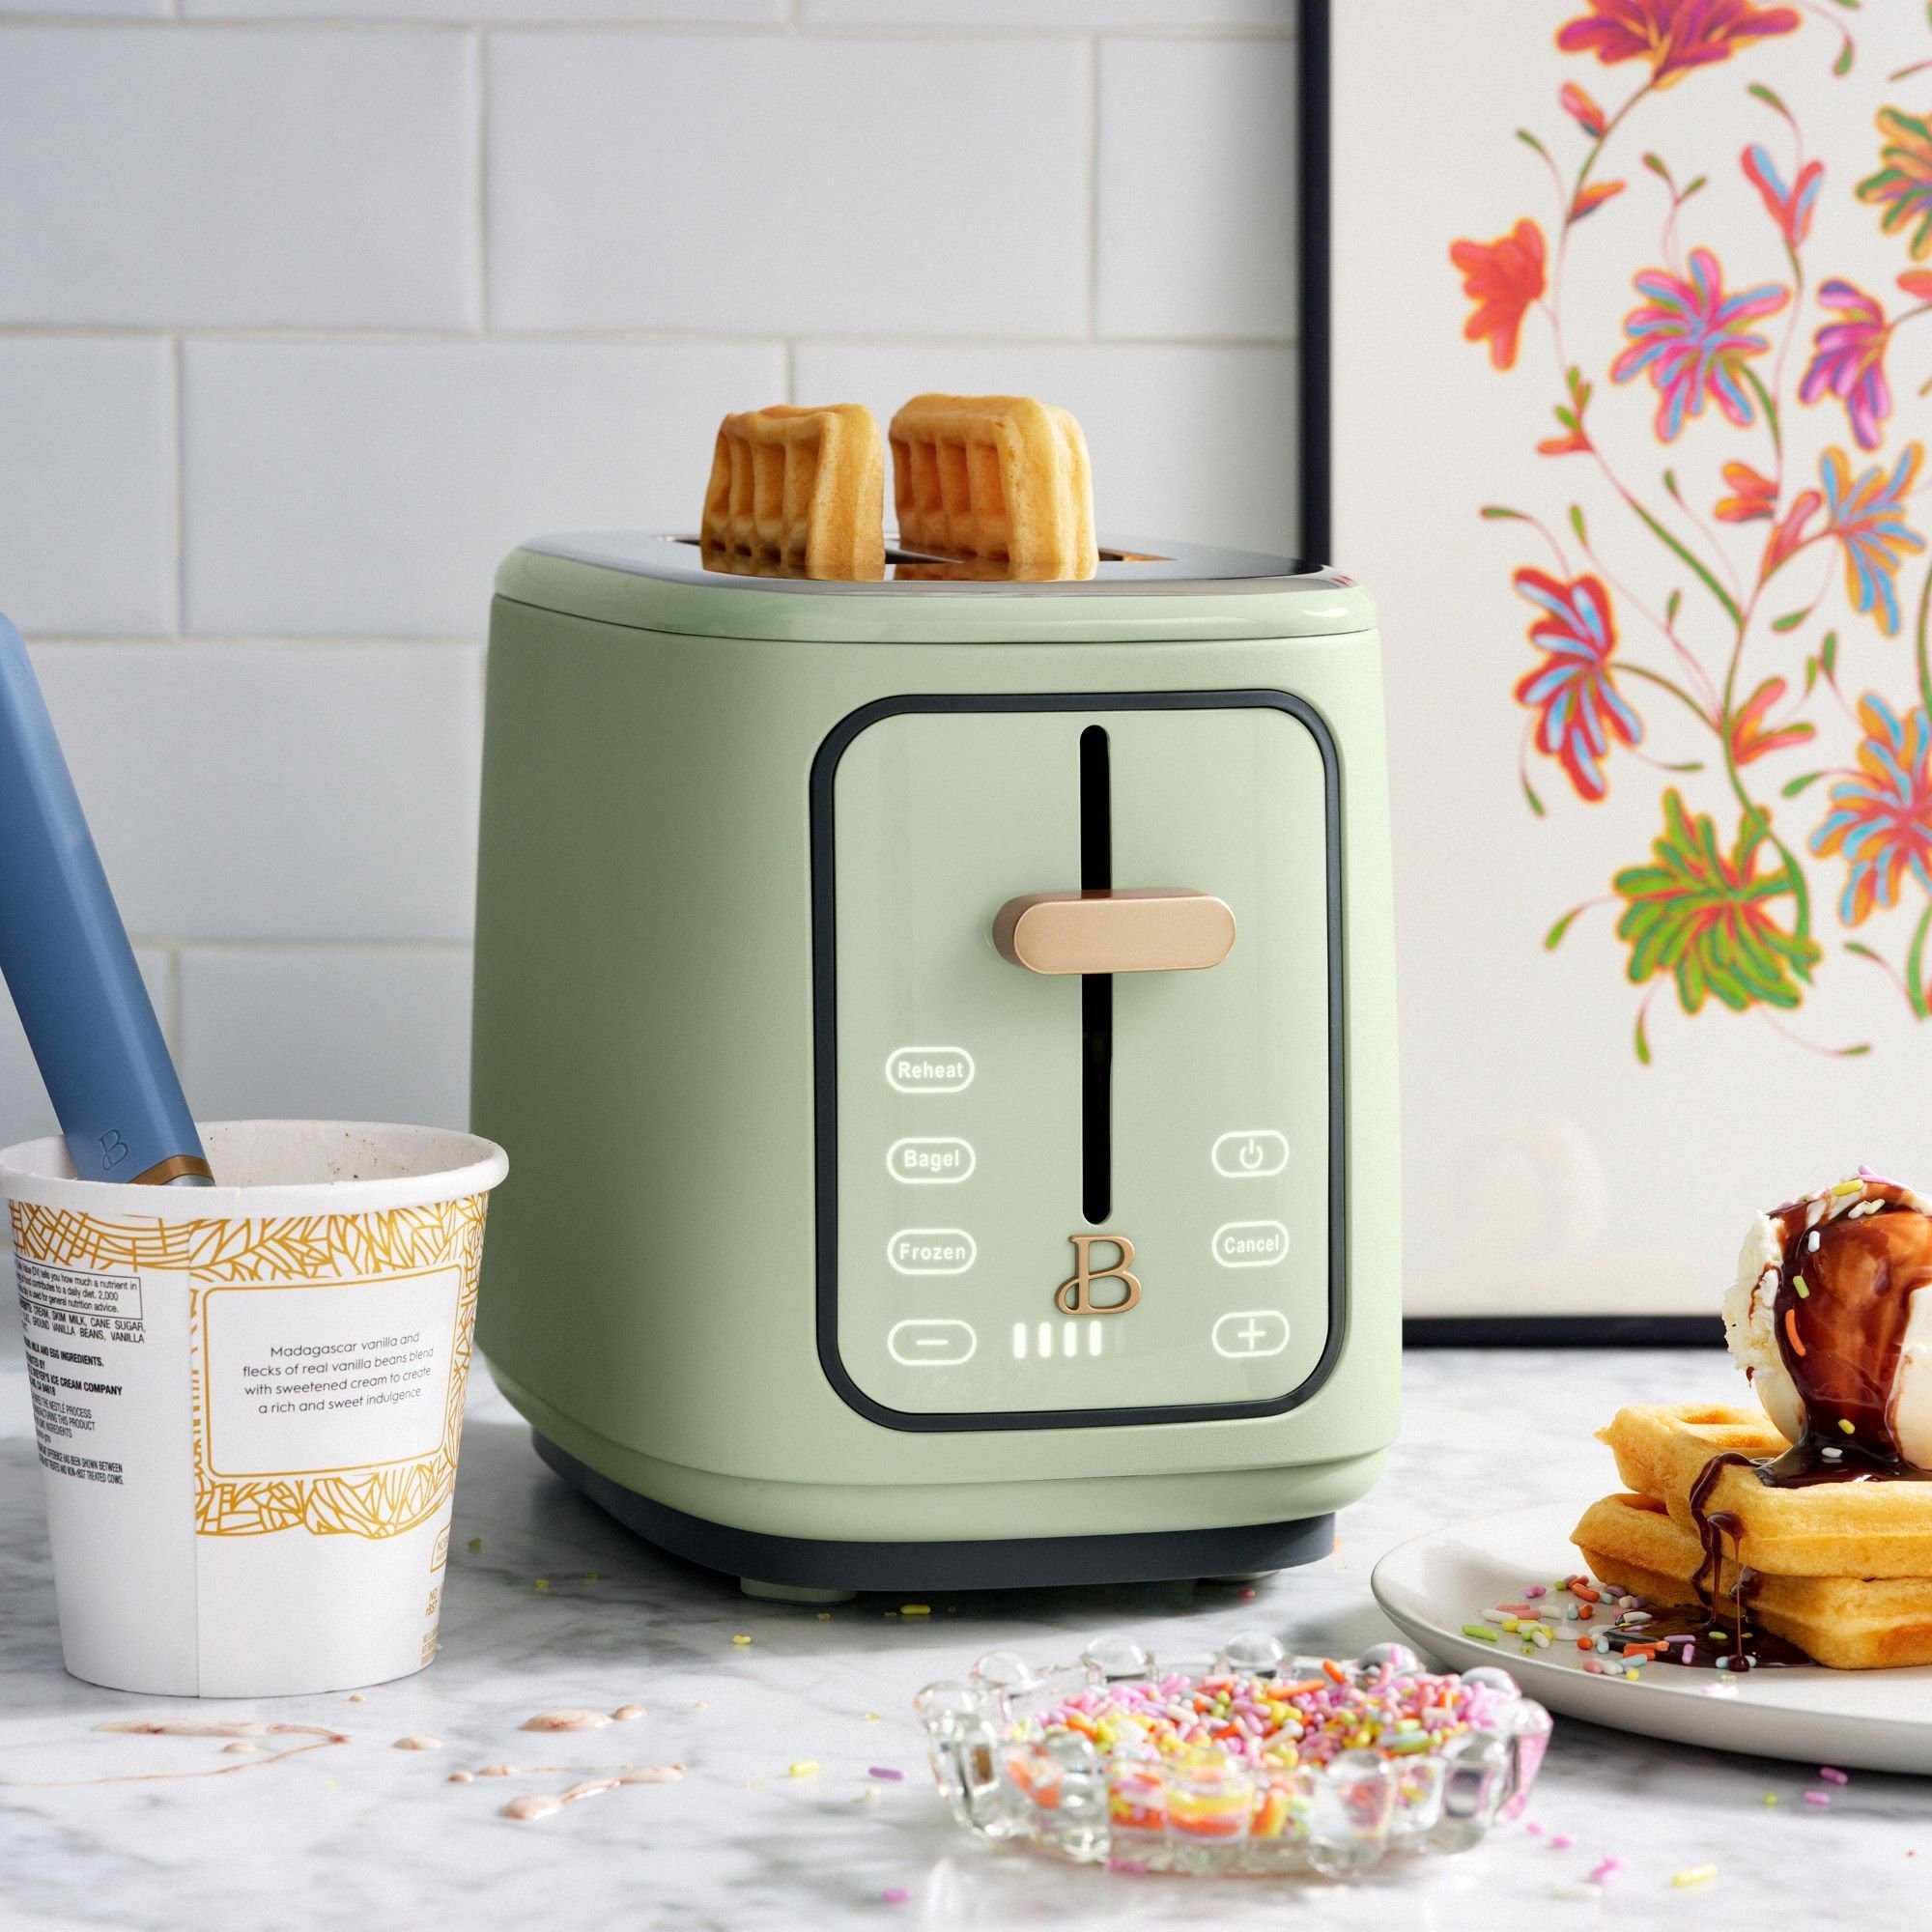 The toaster with a touchscreen toasting two waffles